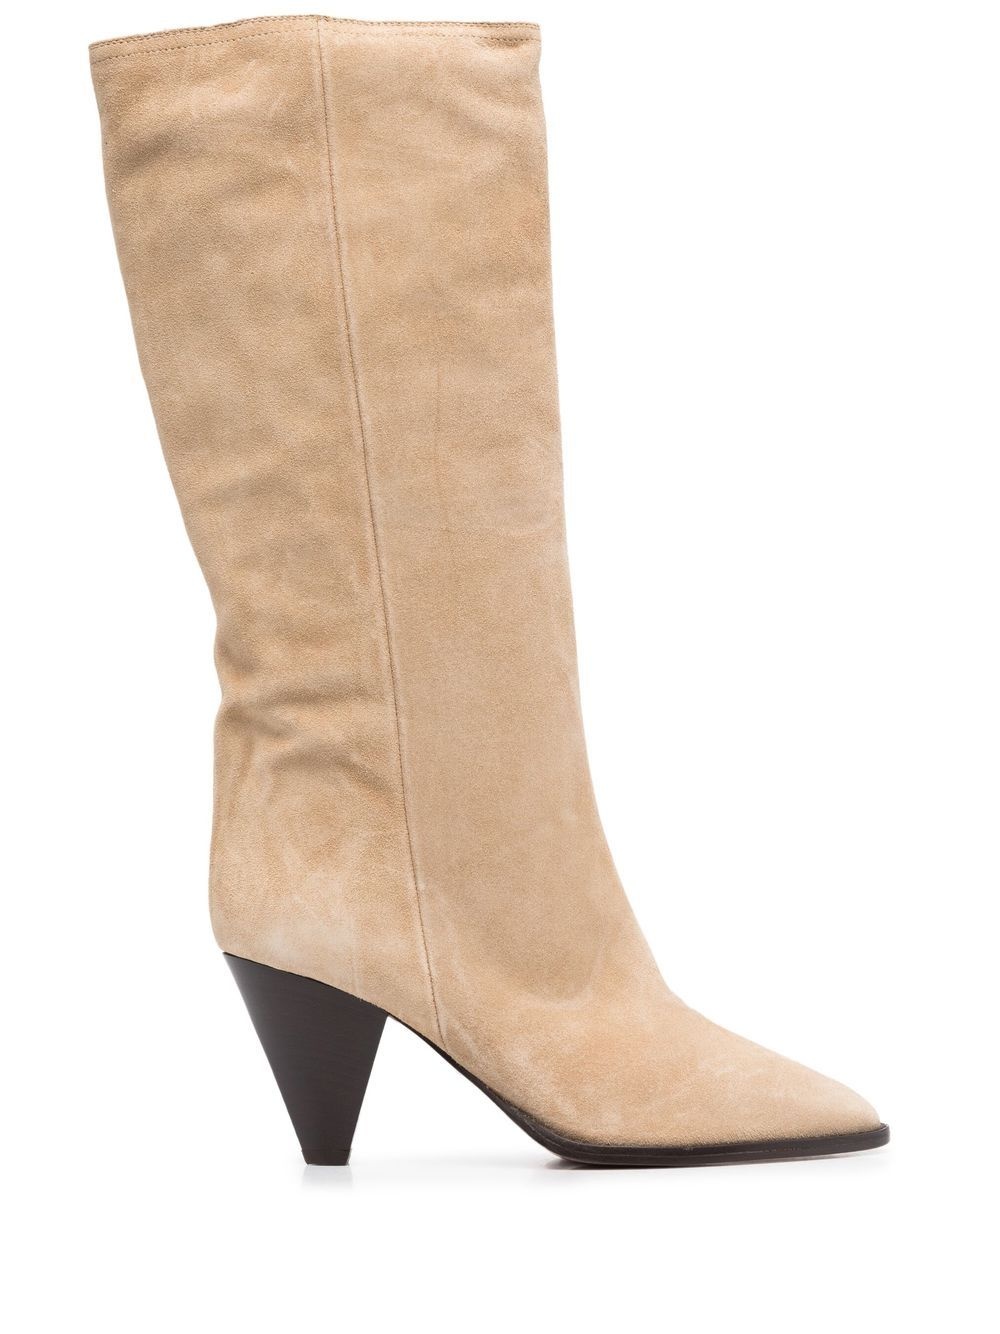 80mm heeled suede boots - 1